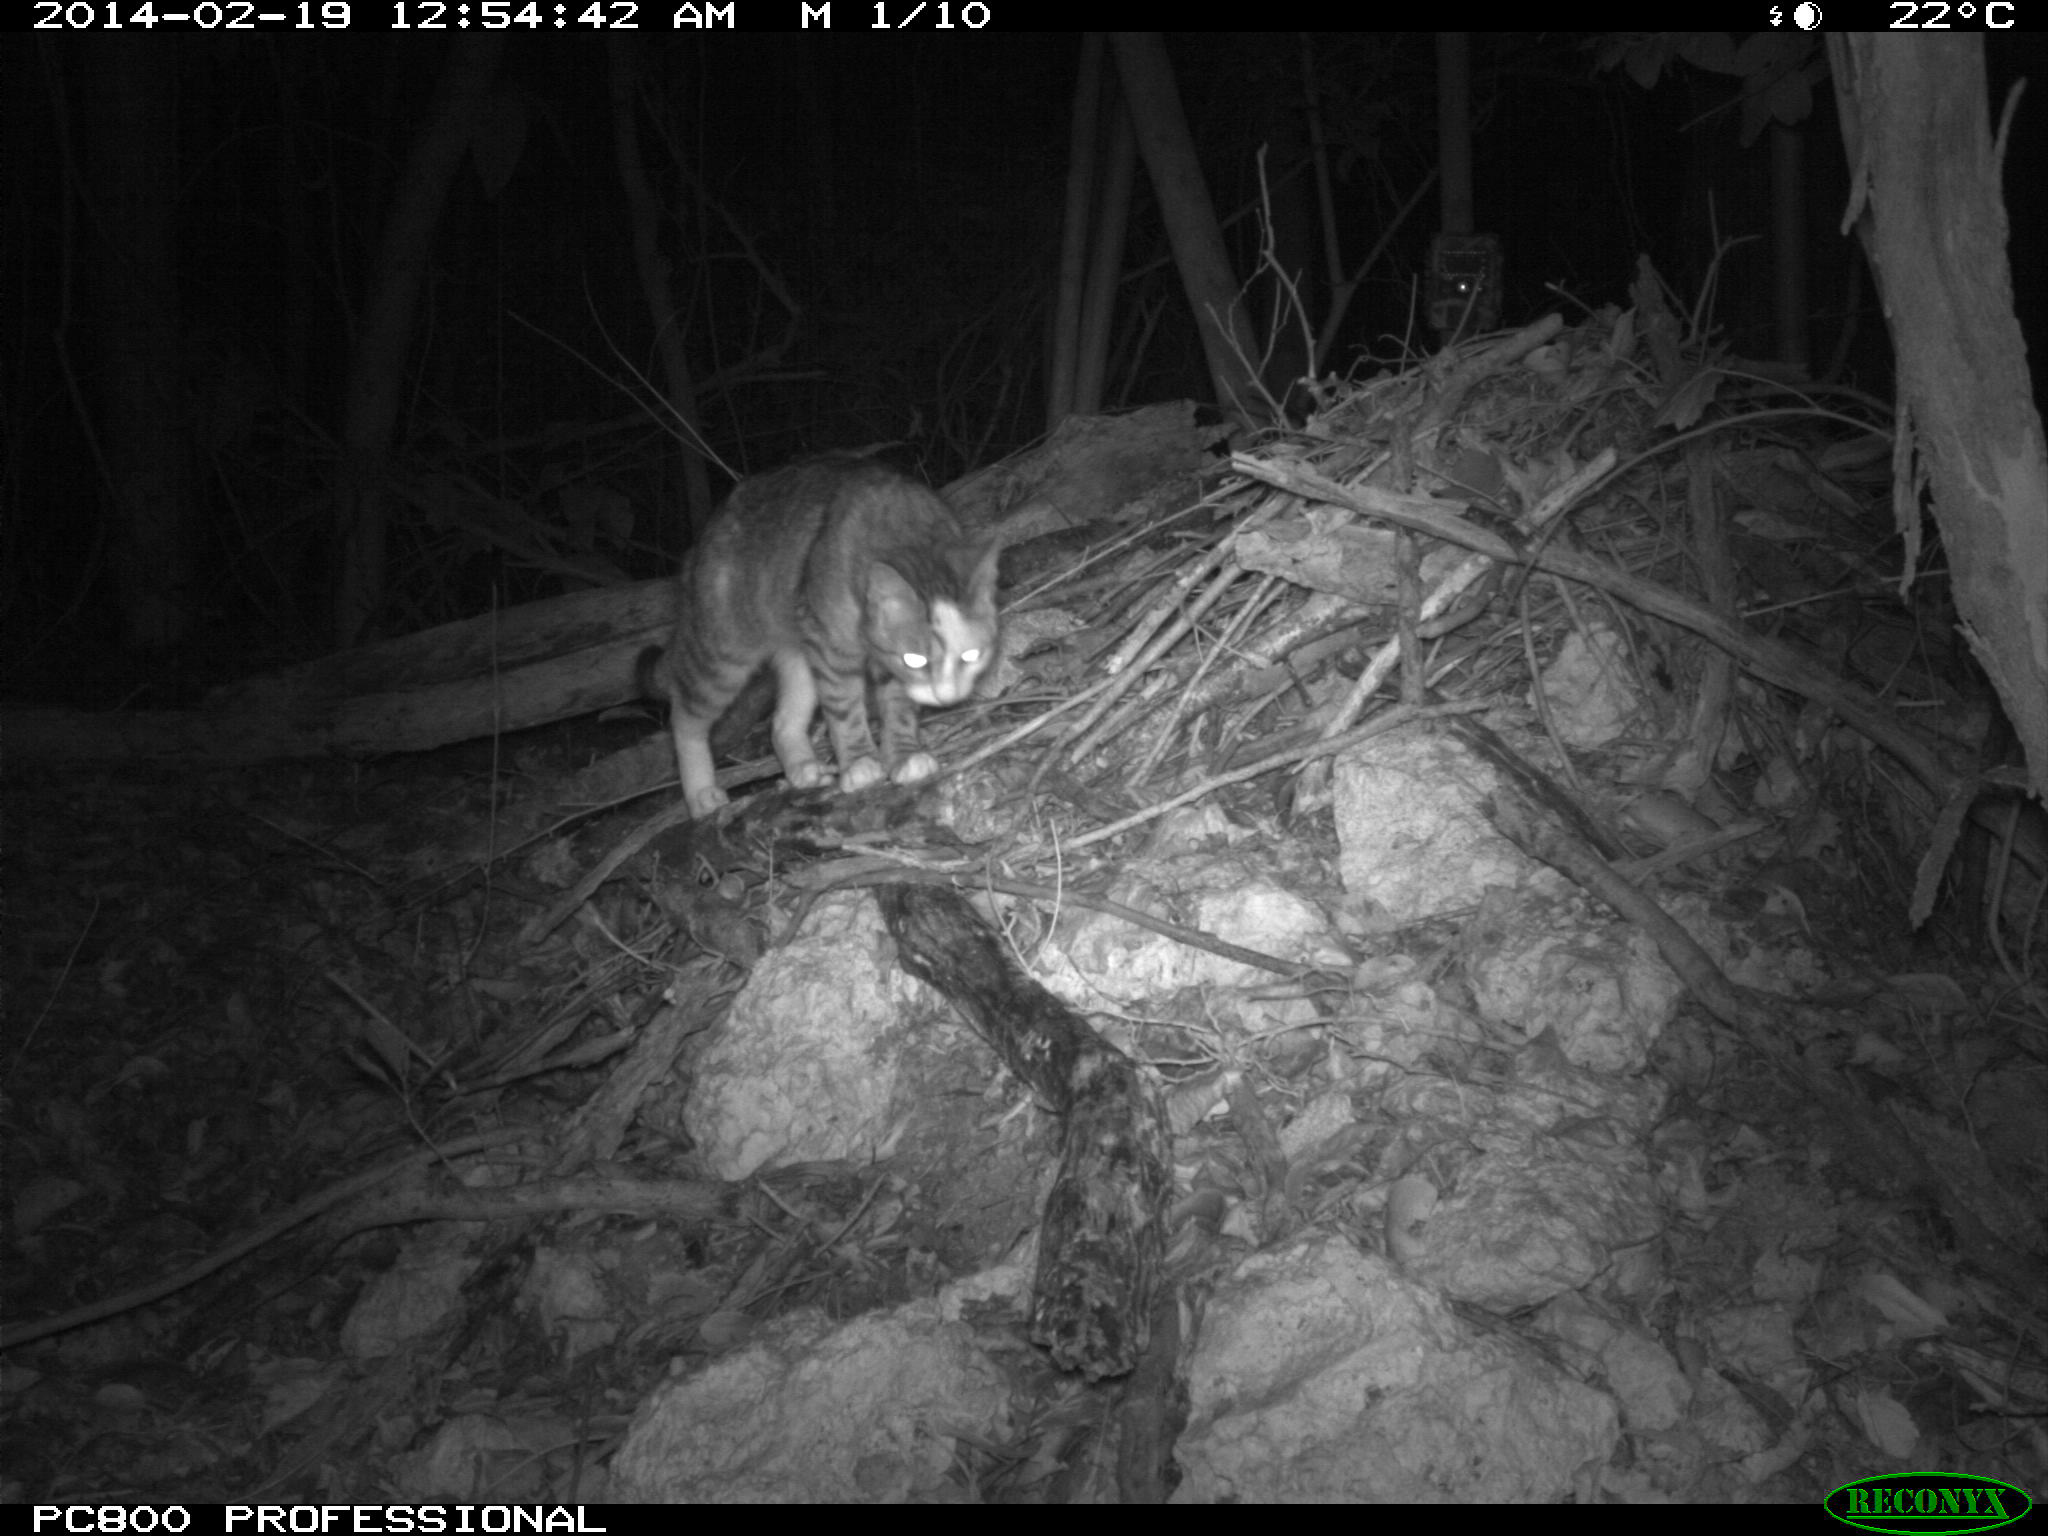 Motion-sensitive camera photo of a cat on a Key Largo woodrat house. Photo courtesy of Dr. Michael Cove and NC State University.